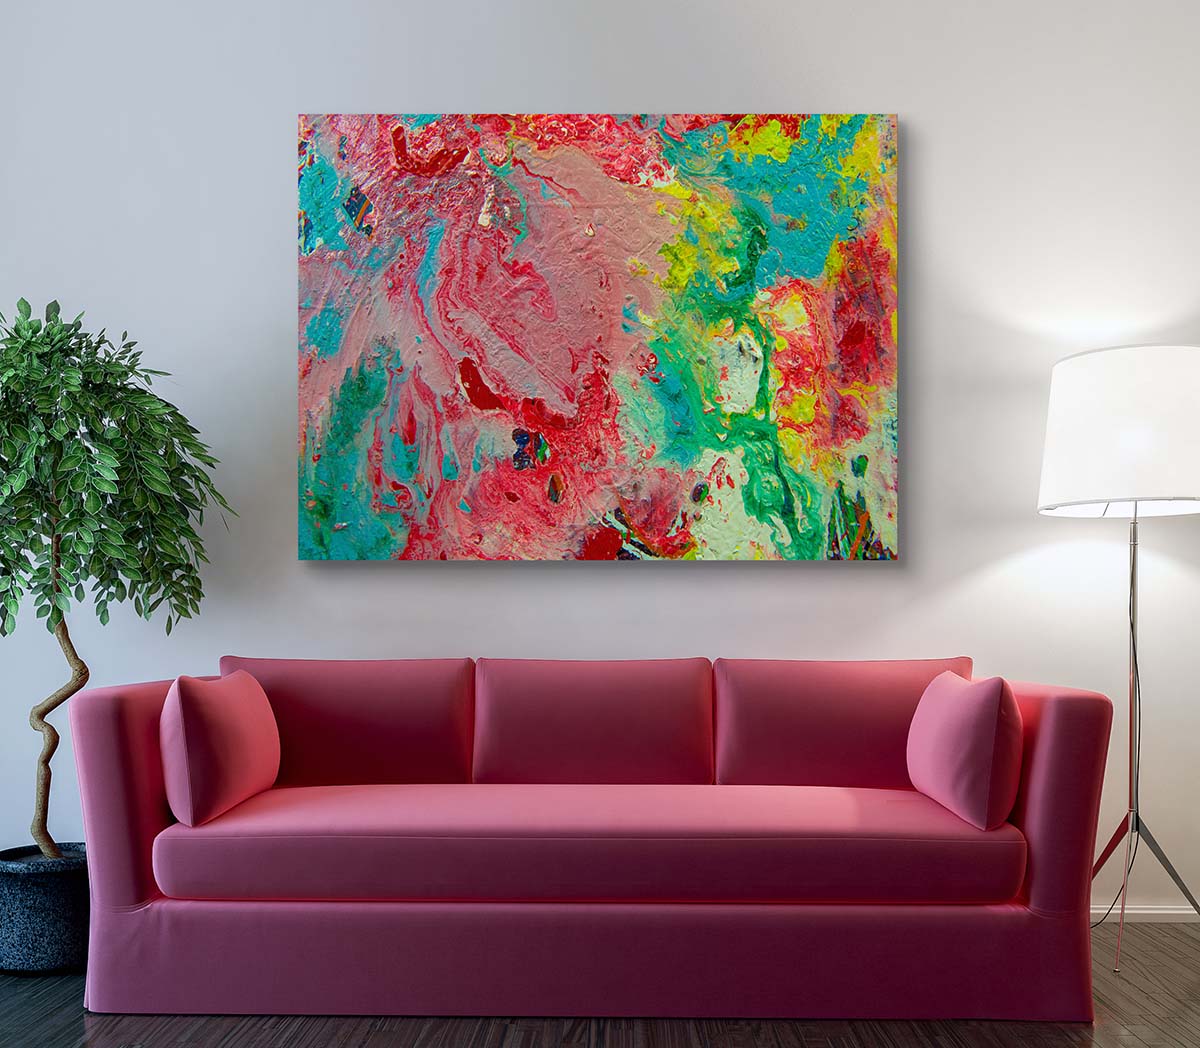 Abstract 21 Marsh art by Doug LaRue canvas print over a soft red couch